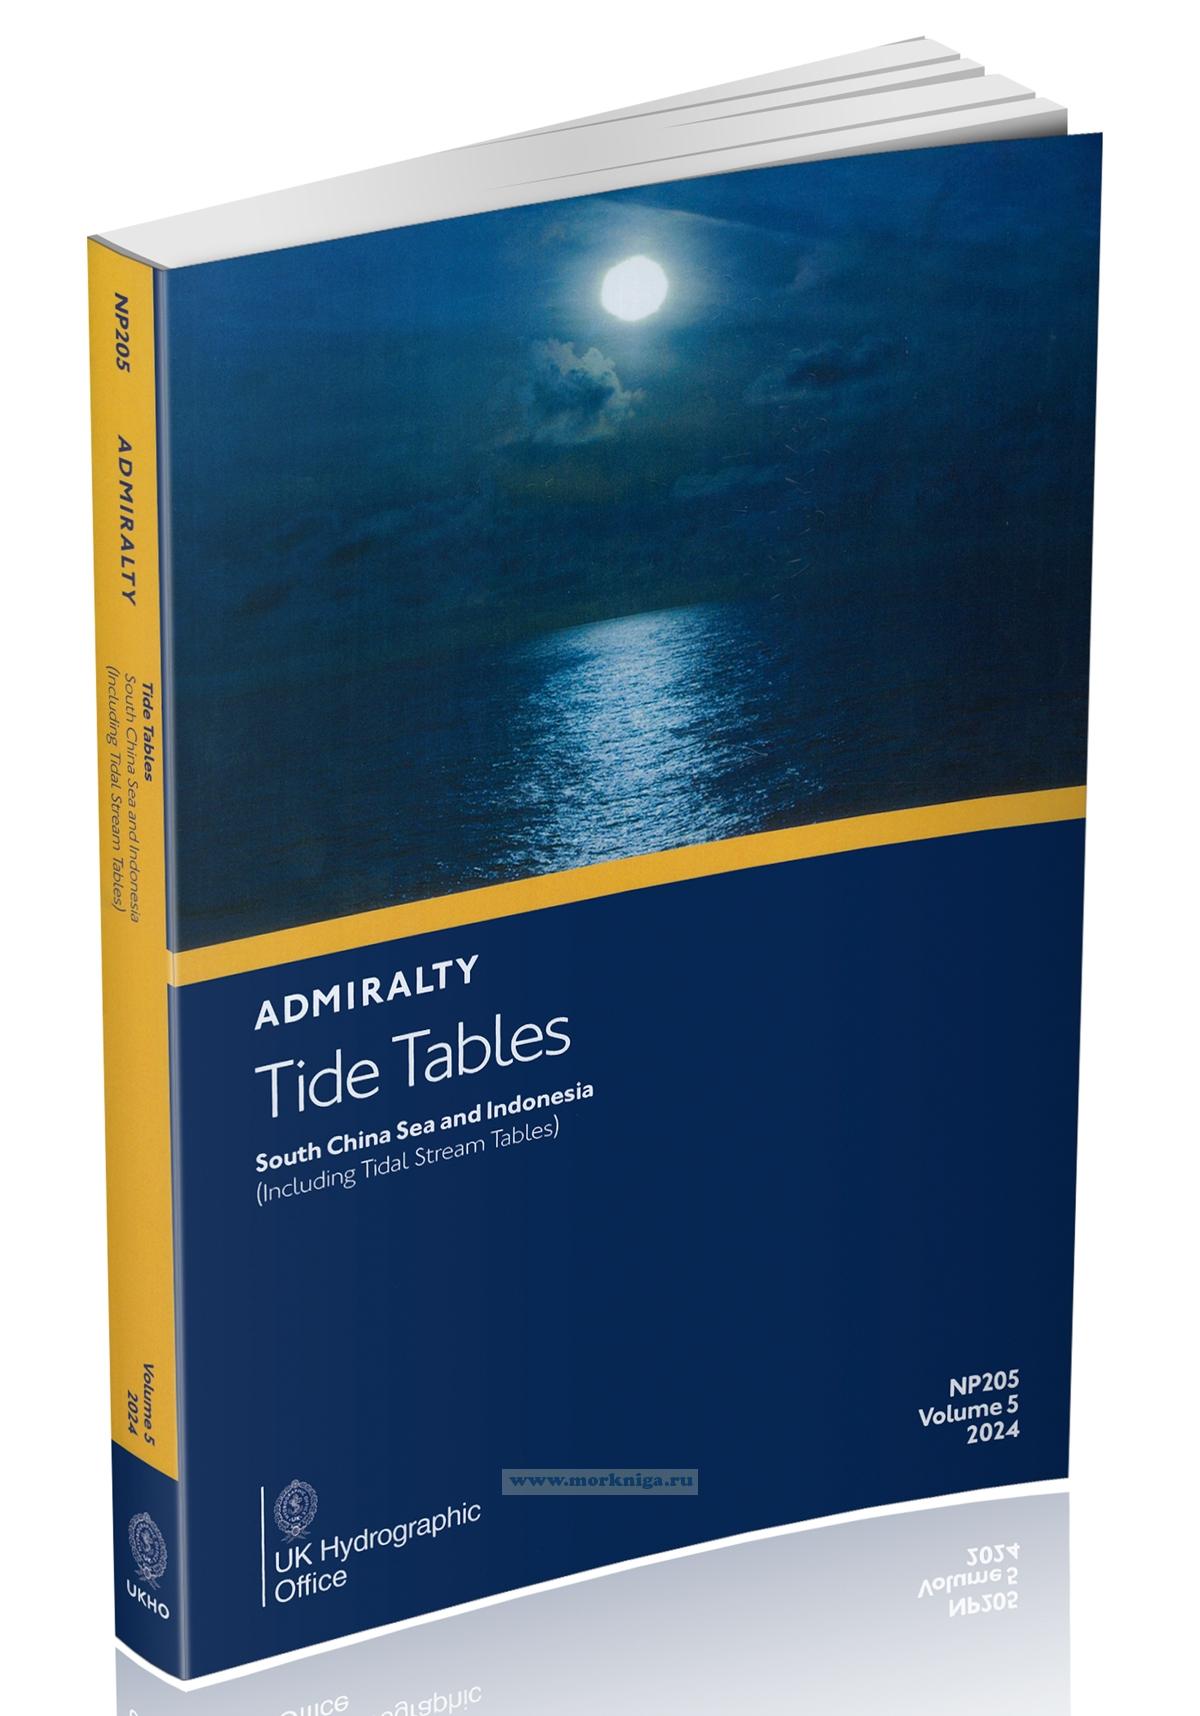 Admiralty Tide Tables. NP205. Volume 5. 2024. South China Sea and Indonesia (Including Tidal Stream Tables)